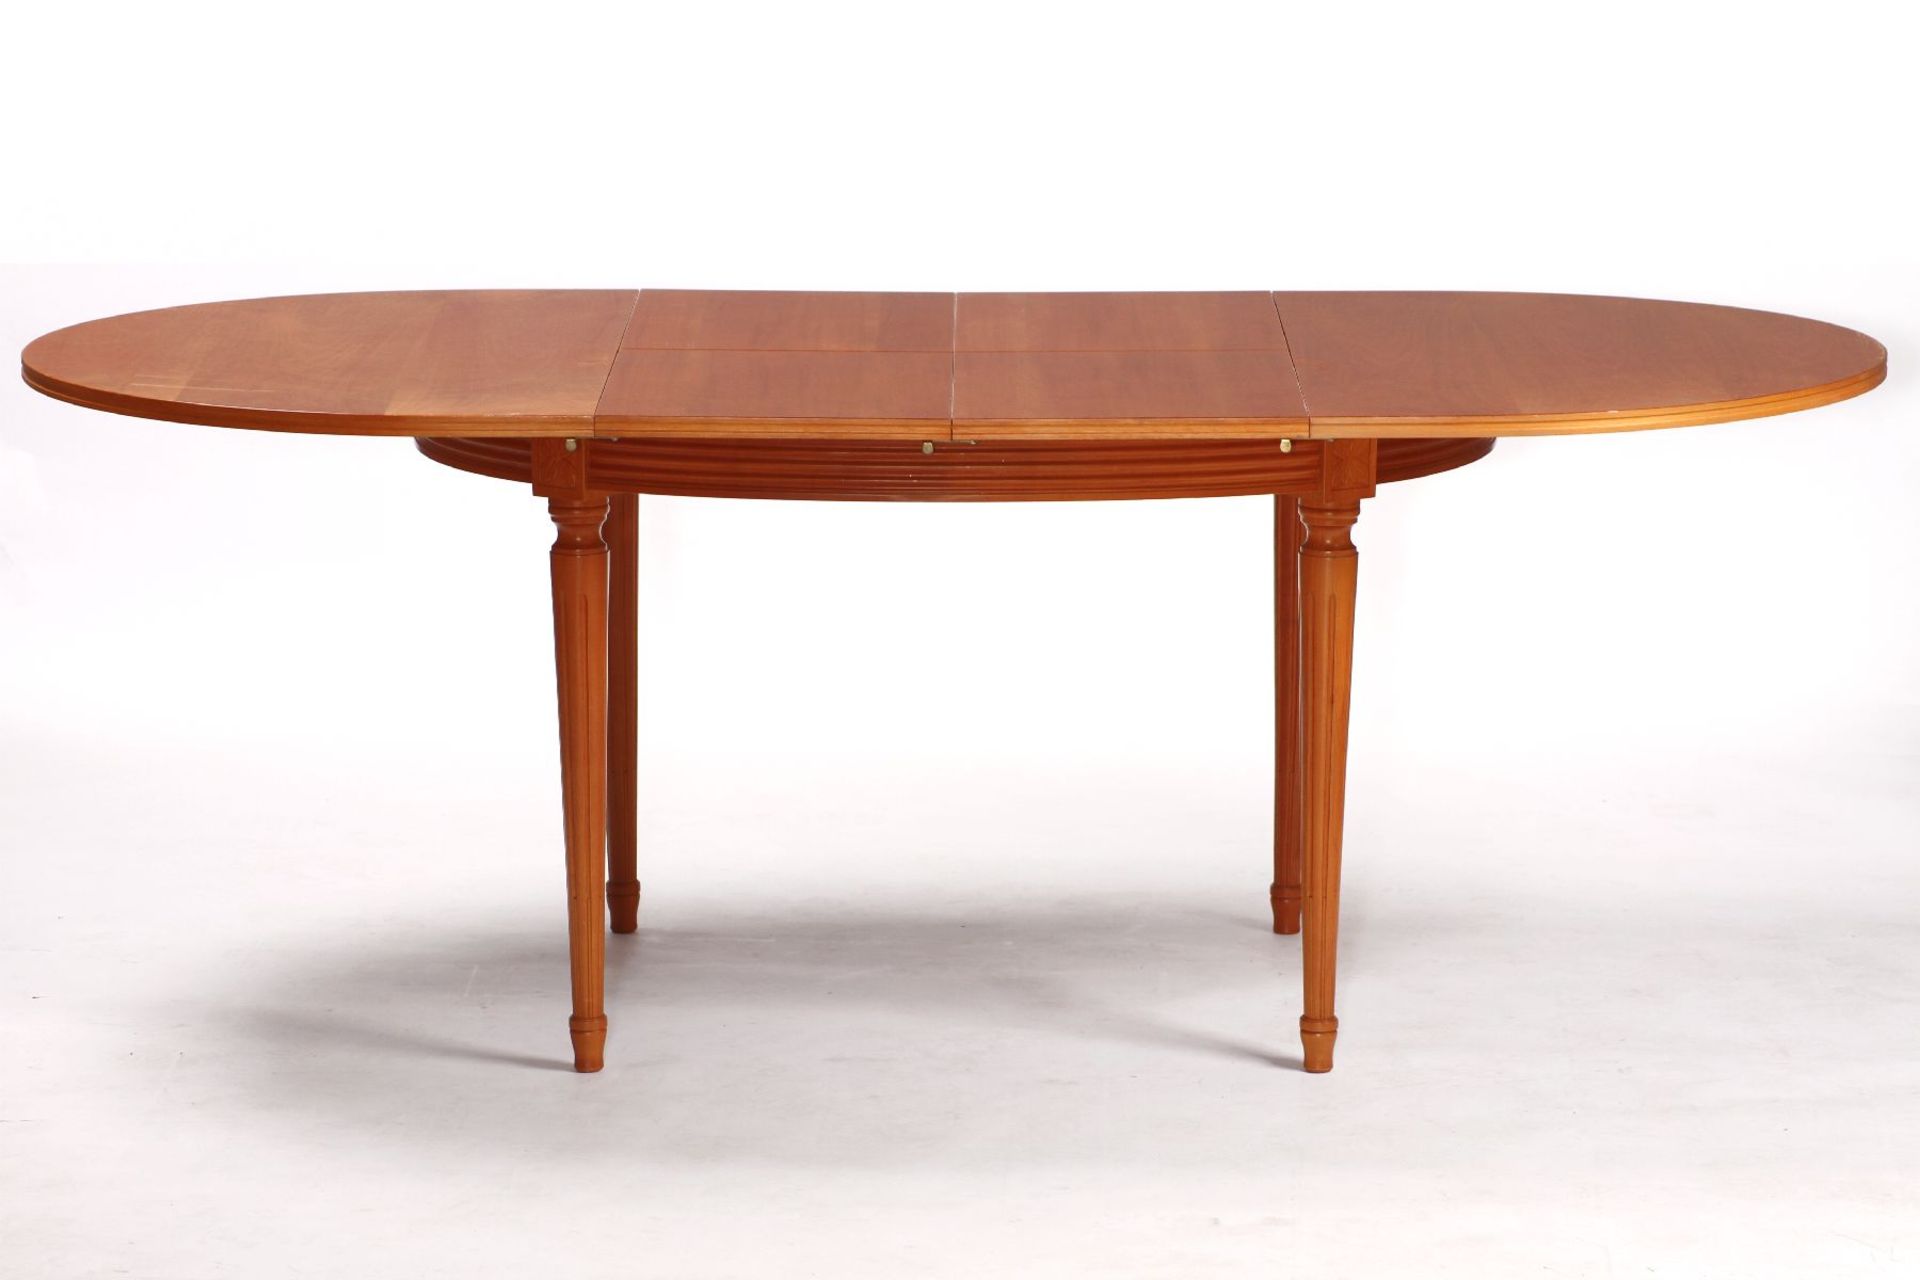 Table with 4 chairs, "Anno Dom", Germany, cherry tree partly solid, cherry veneered top,extendable - Bild 2 aus 3